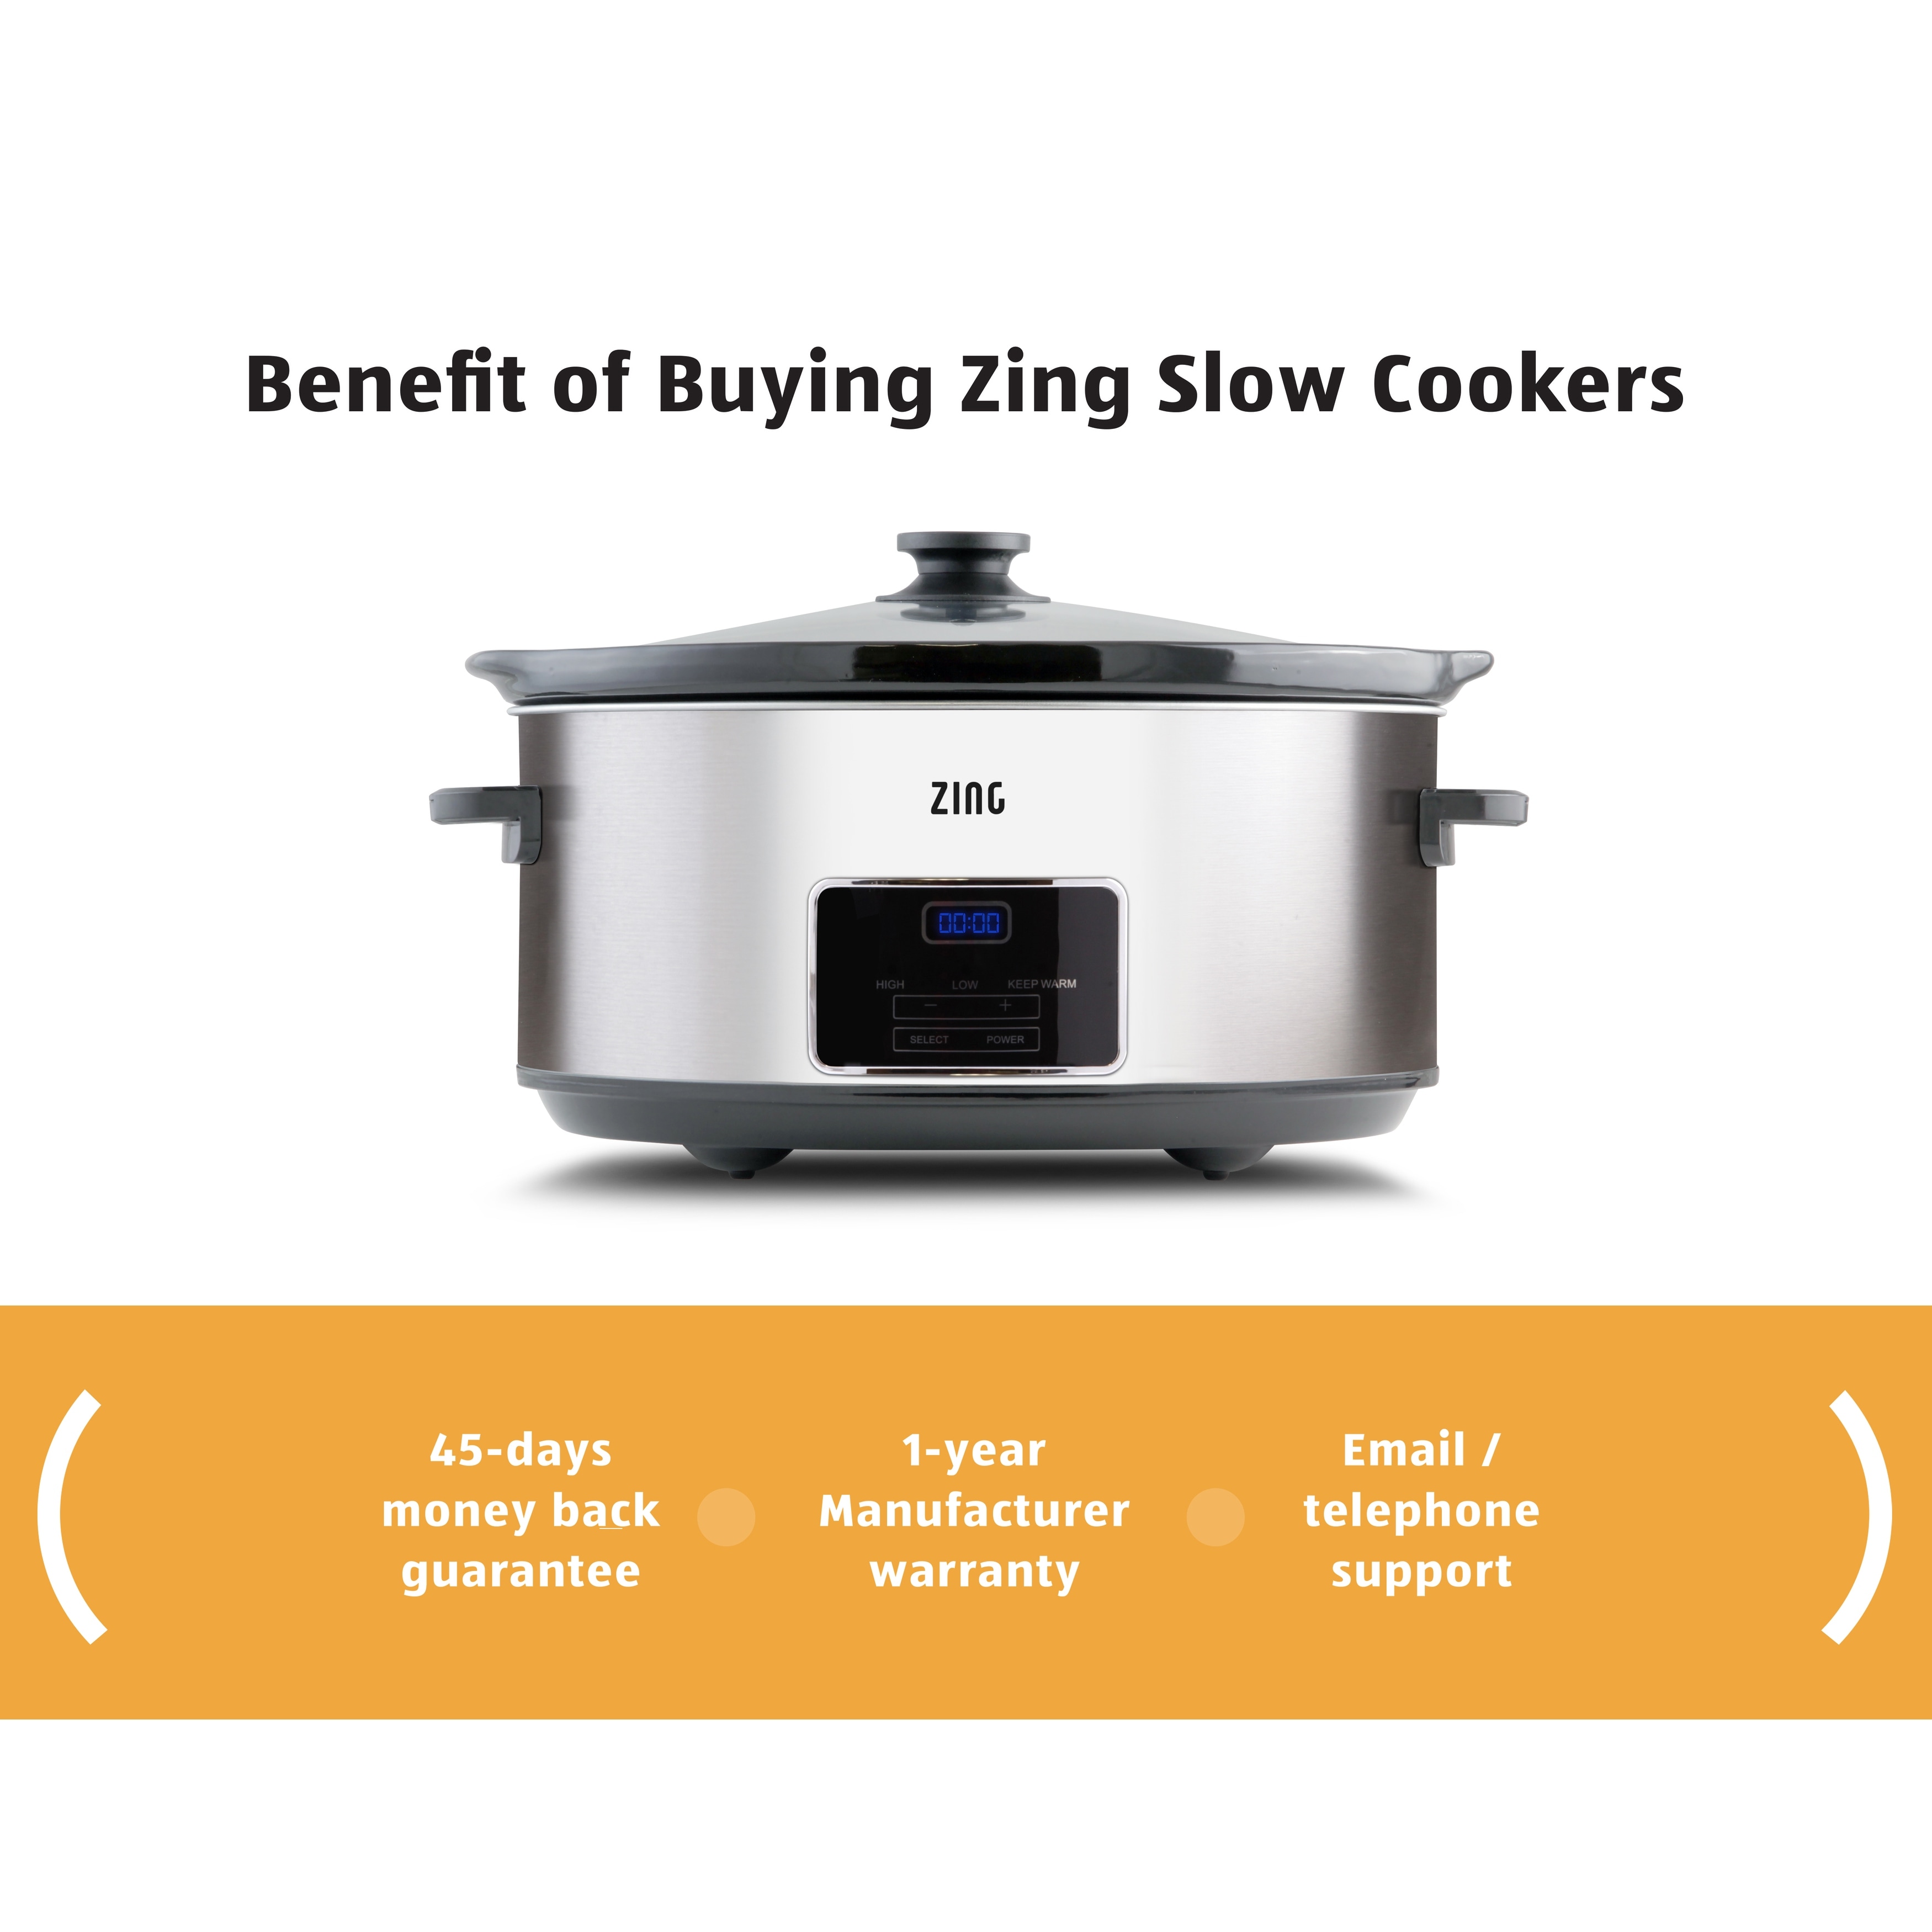 7-Quart Oval Stainless Steel Slow Cooker